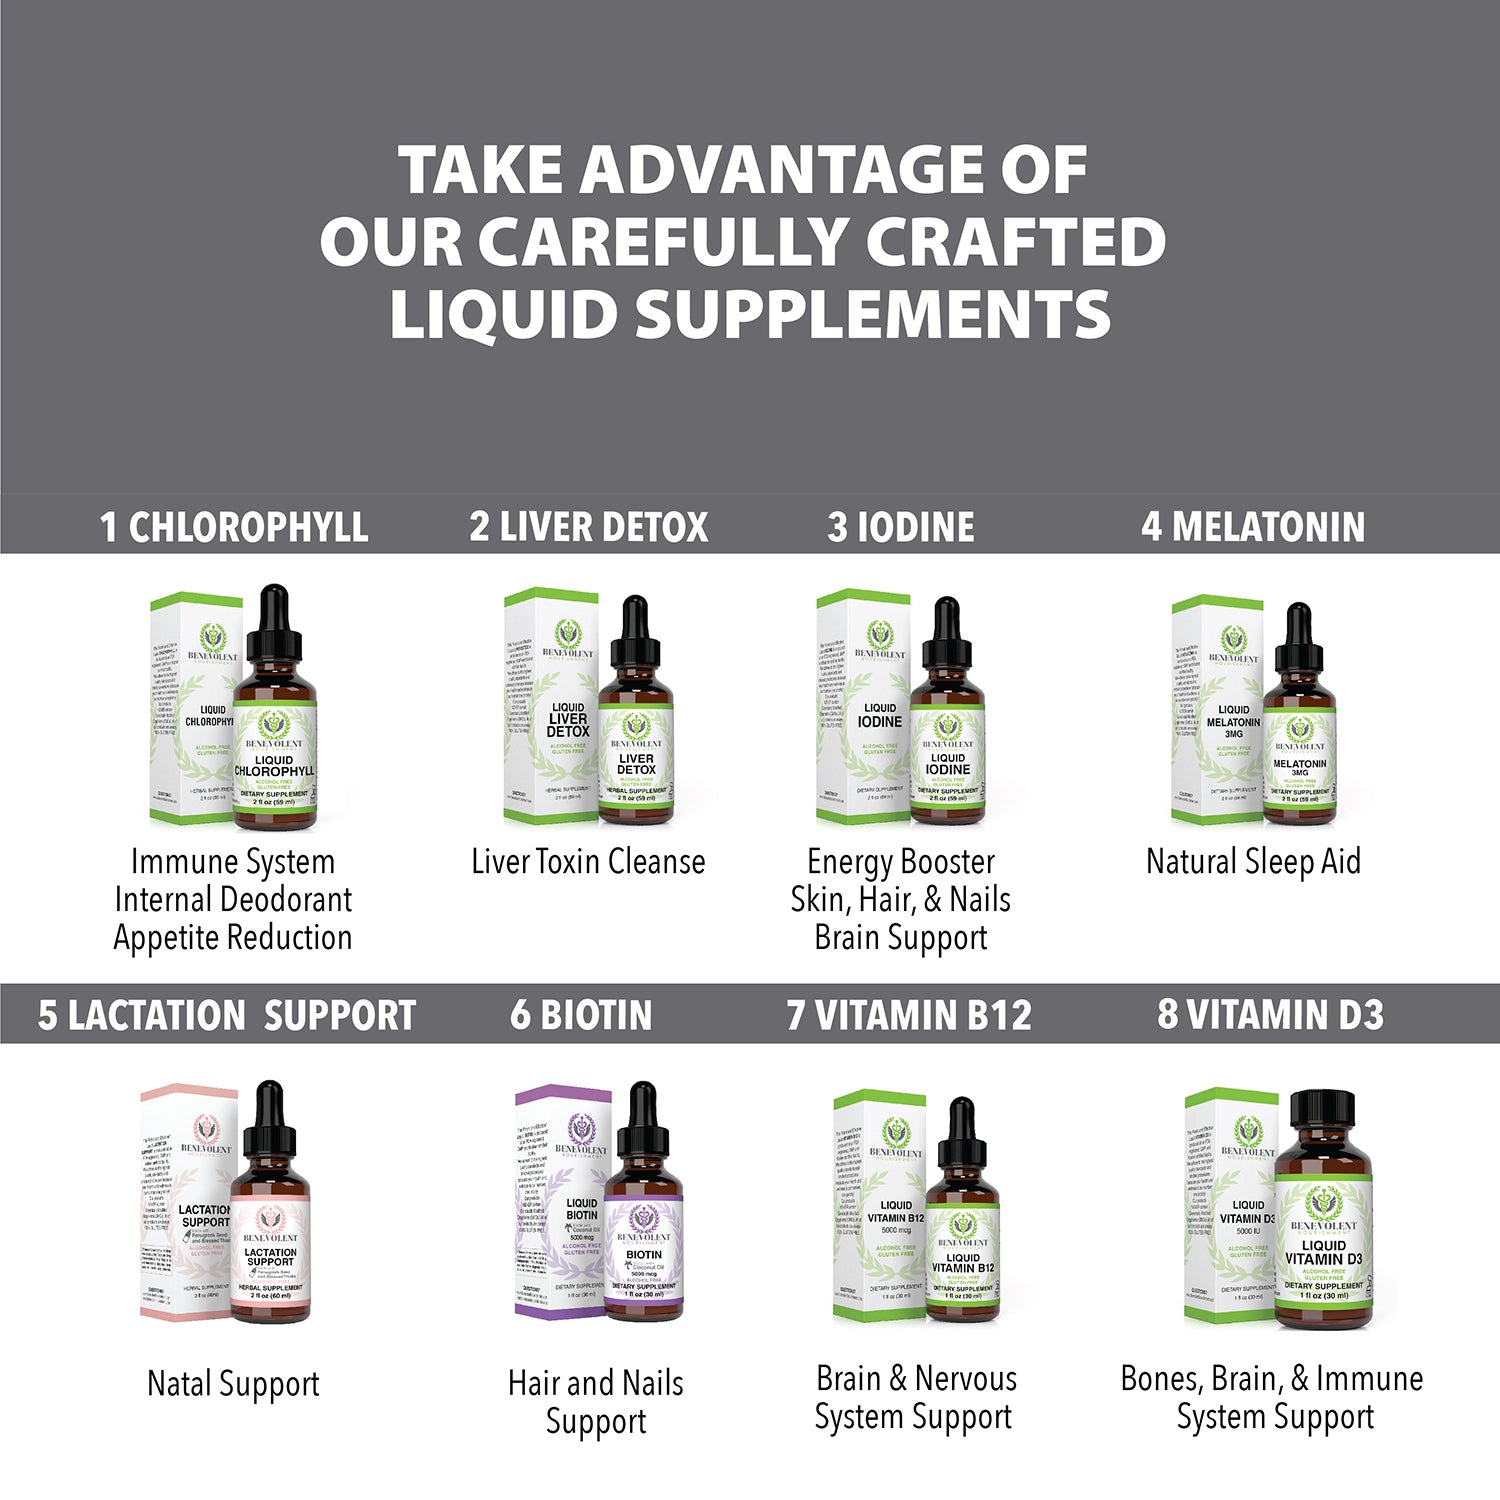 Take advantage of all of our liquid supplements